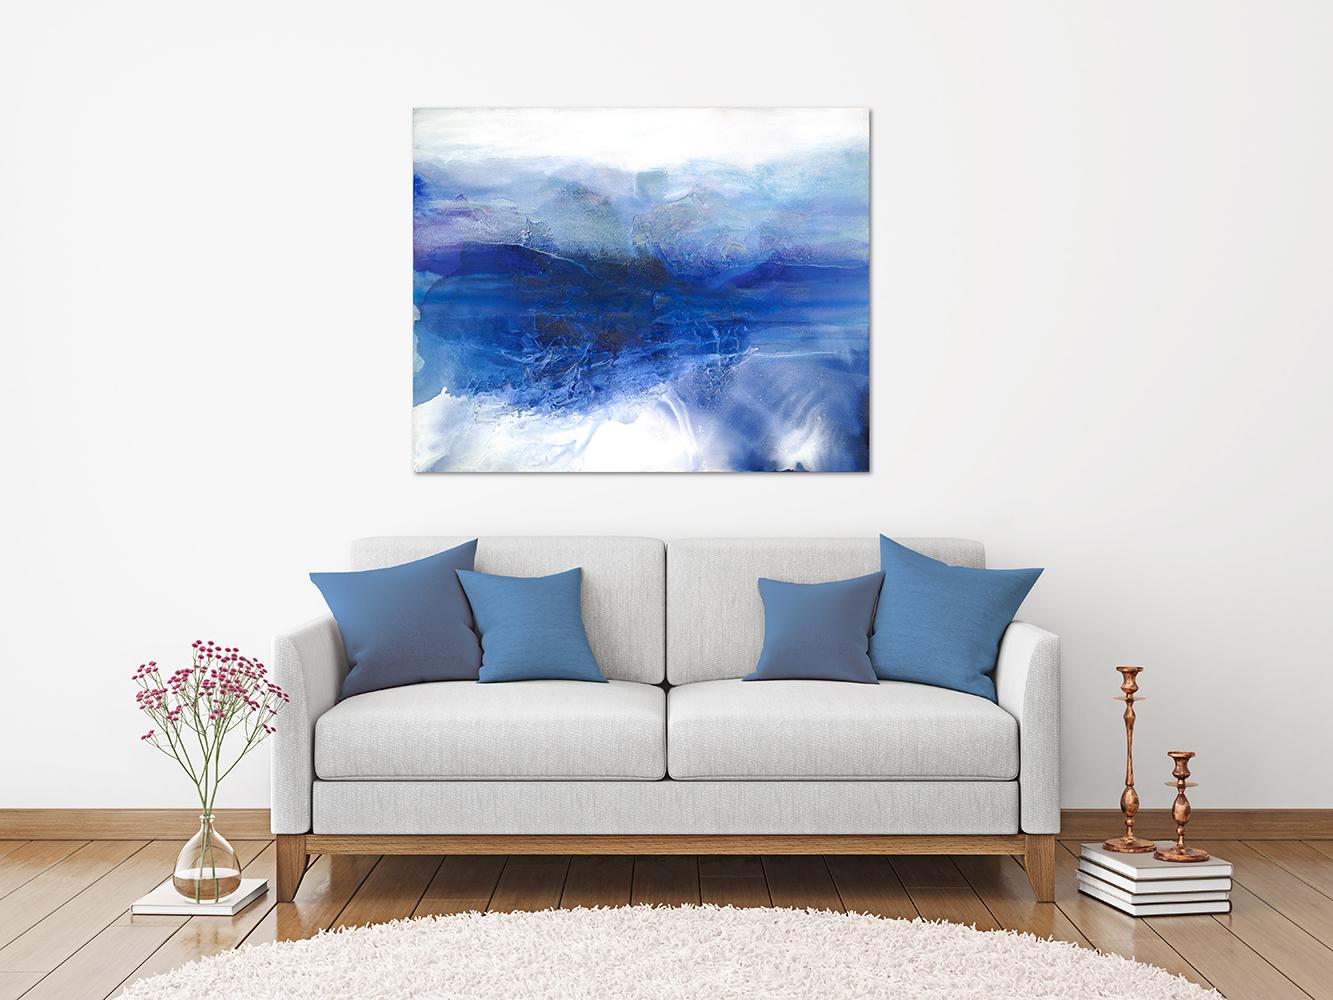 Teodora Guererra Abstract Painting - 'Restless Tide', Large Contemporary Abstract Minimalist Acrylic Painting